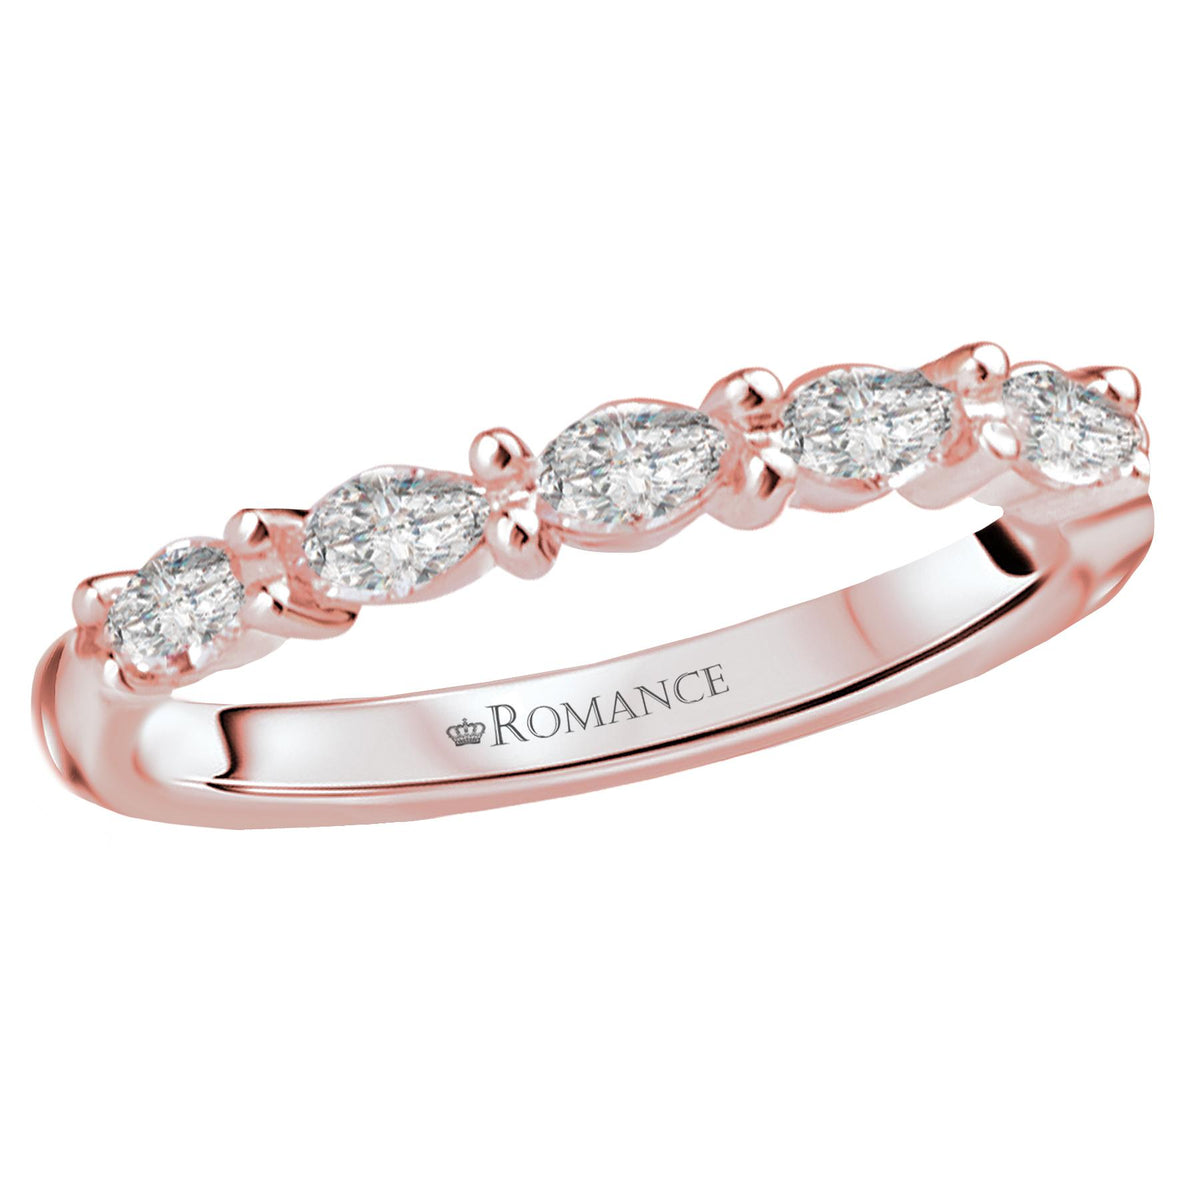 14KT Gold 1/4 CTW Marquise Diamond 5 Stone Band Rose / 4,Rose / 4.5,Rose / 5,Rose / 5.5,Rose / 6,Rose / 6.5,Rose / 7,Rose / 7.5,Rose / 8,Rose / 8.5,Rose / 9